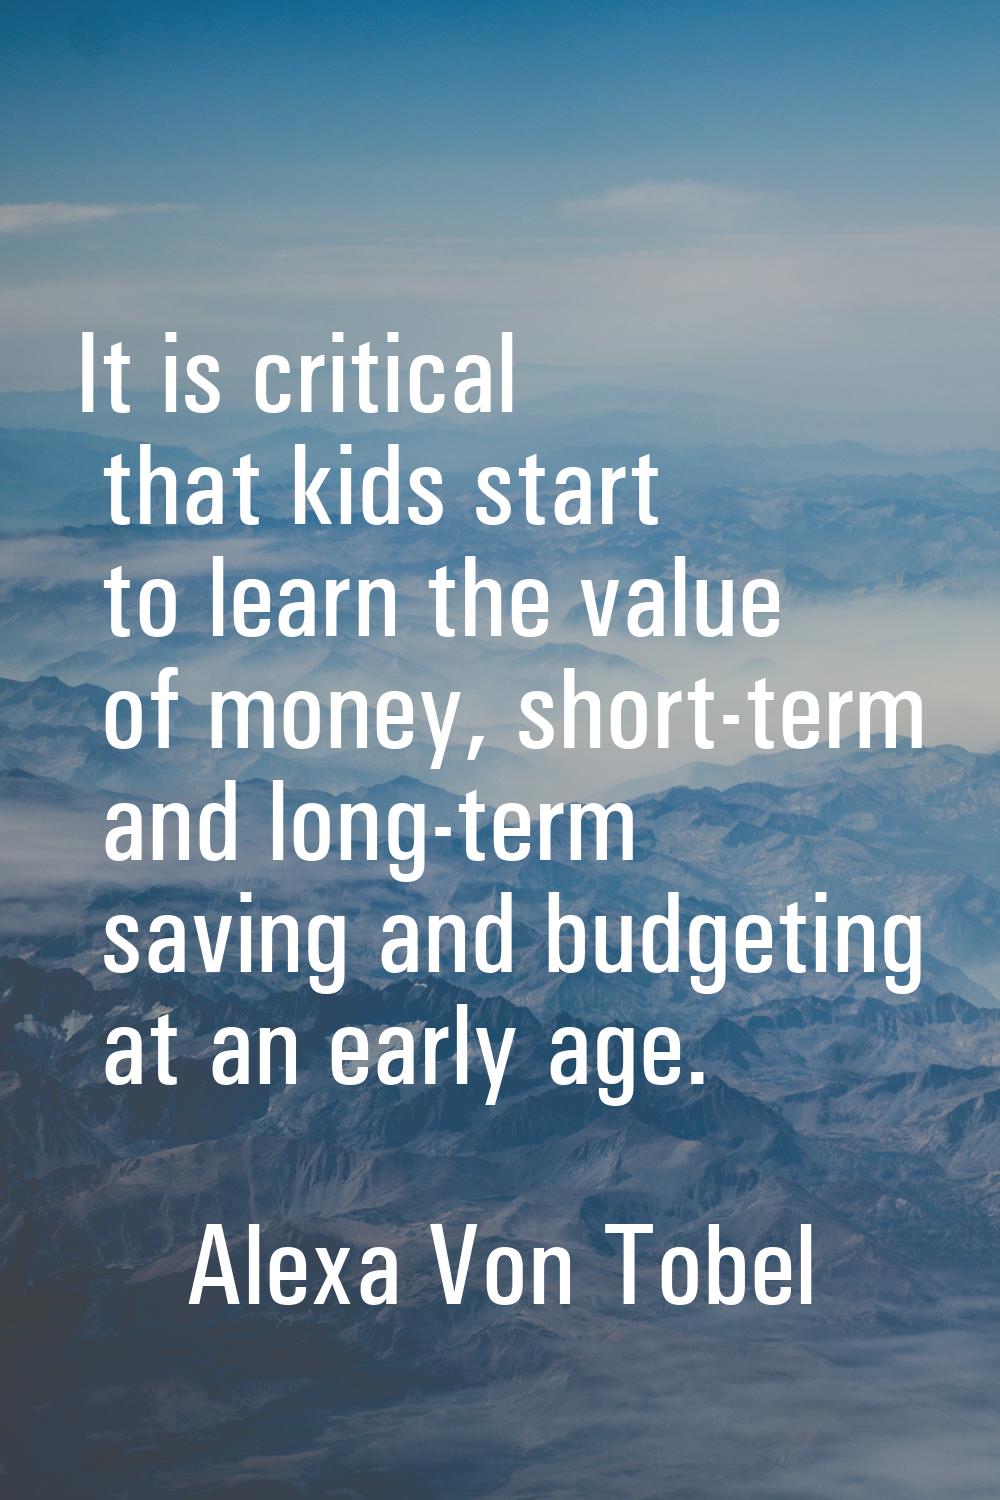 It is critical that kids start to learn the value of money, short-term and long-term saving and bud